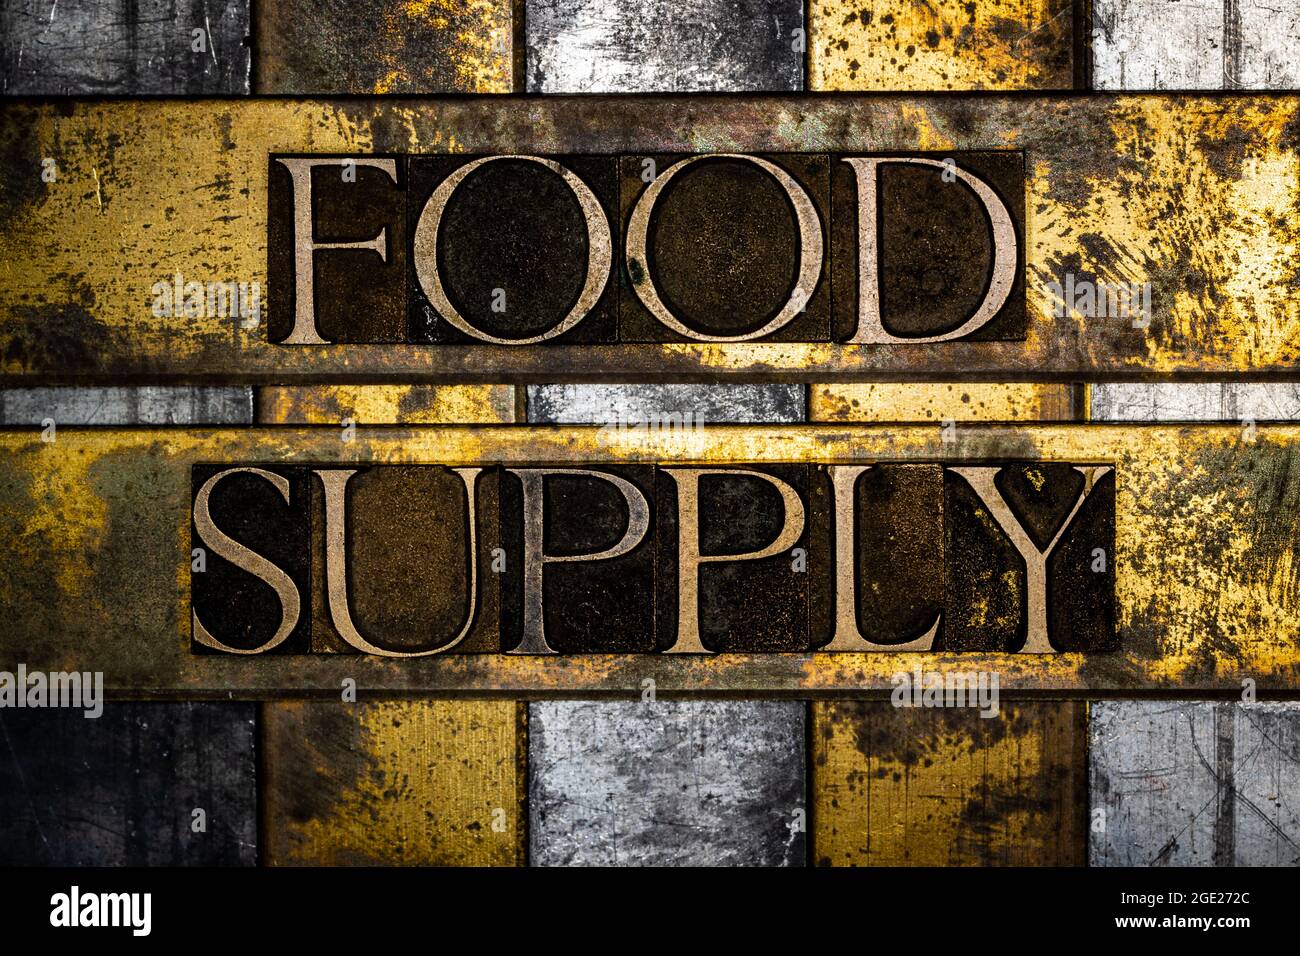 Food Supply text message on vintage textured grunge copper and gold background Stock Photo